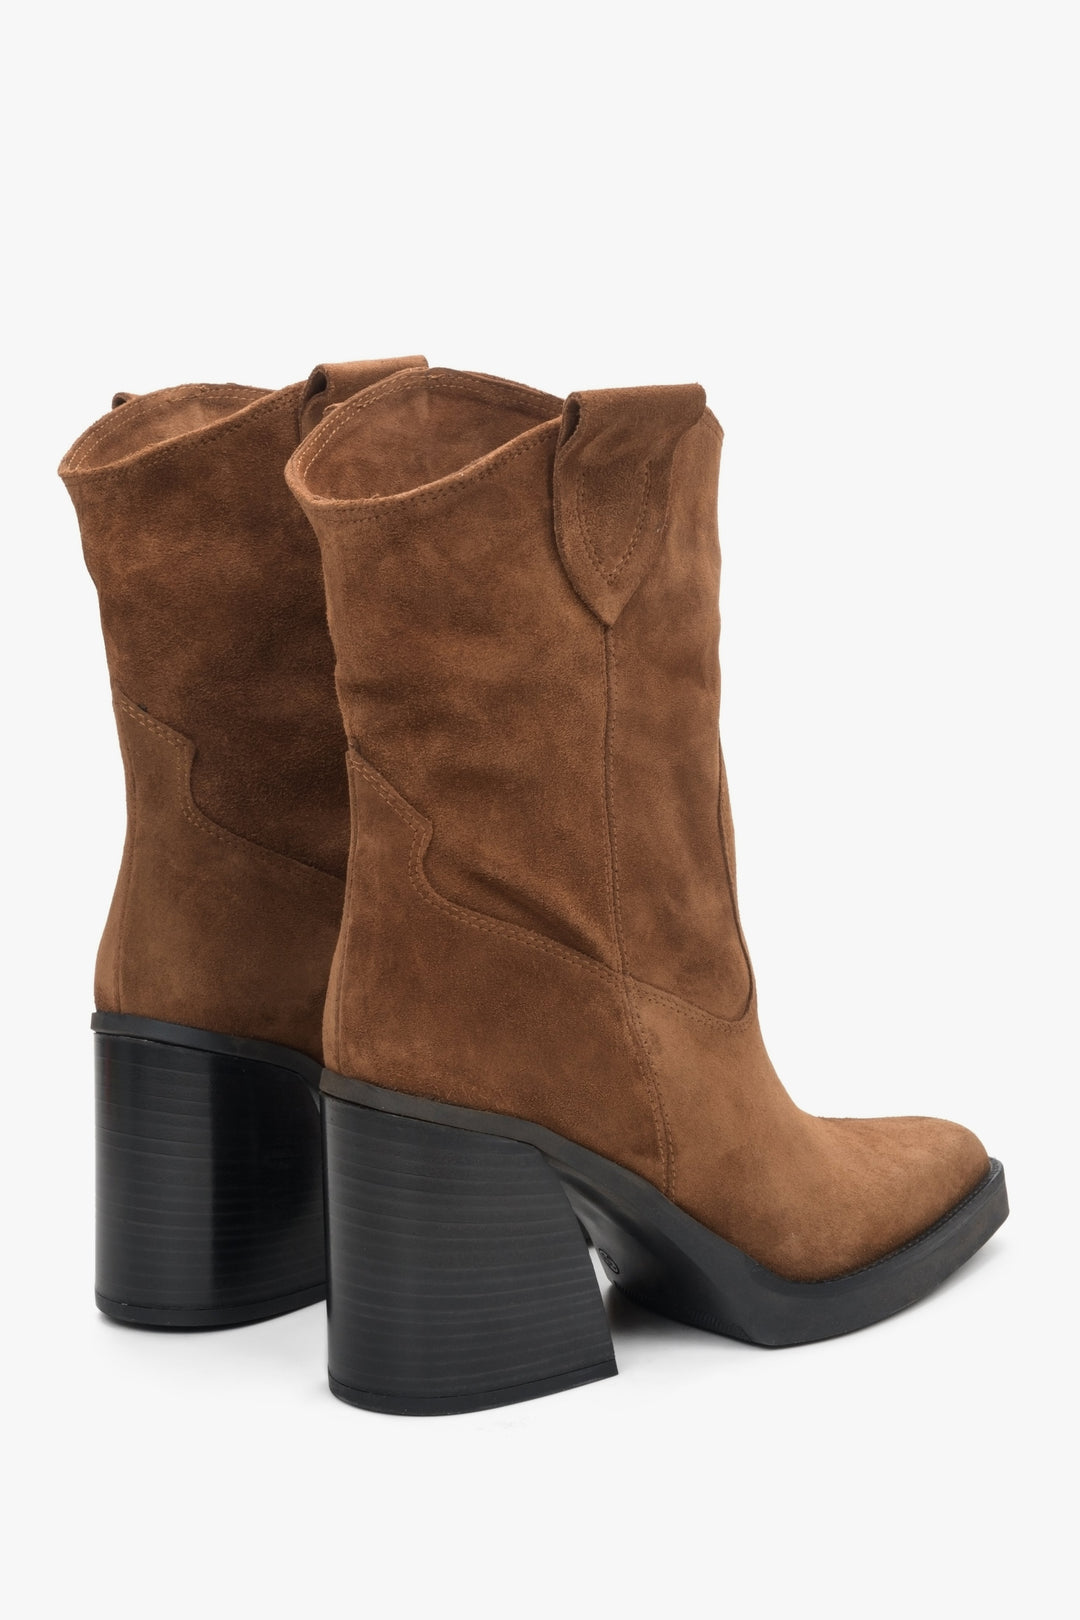 Brown women's suede cowboy boots on a sturdy block heel.